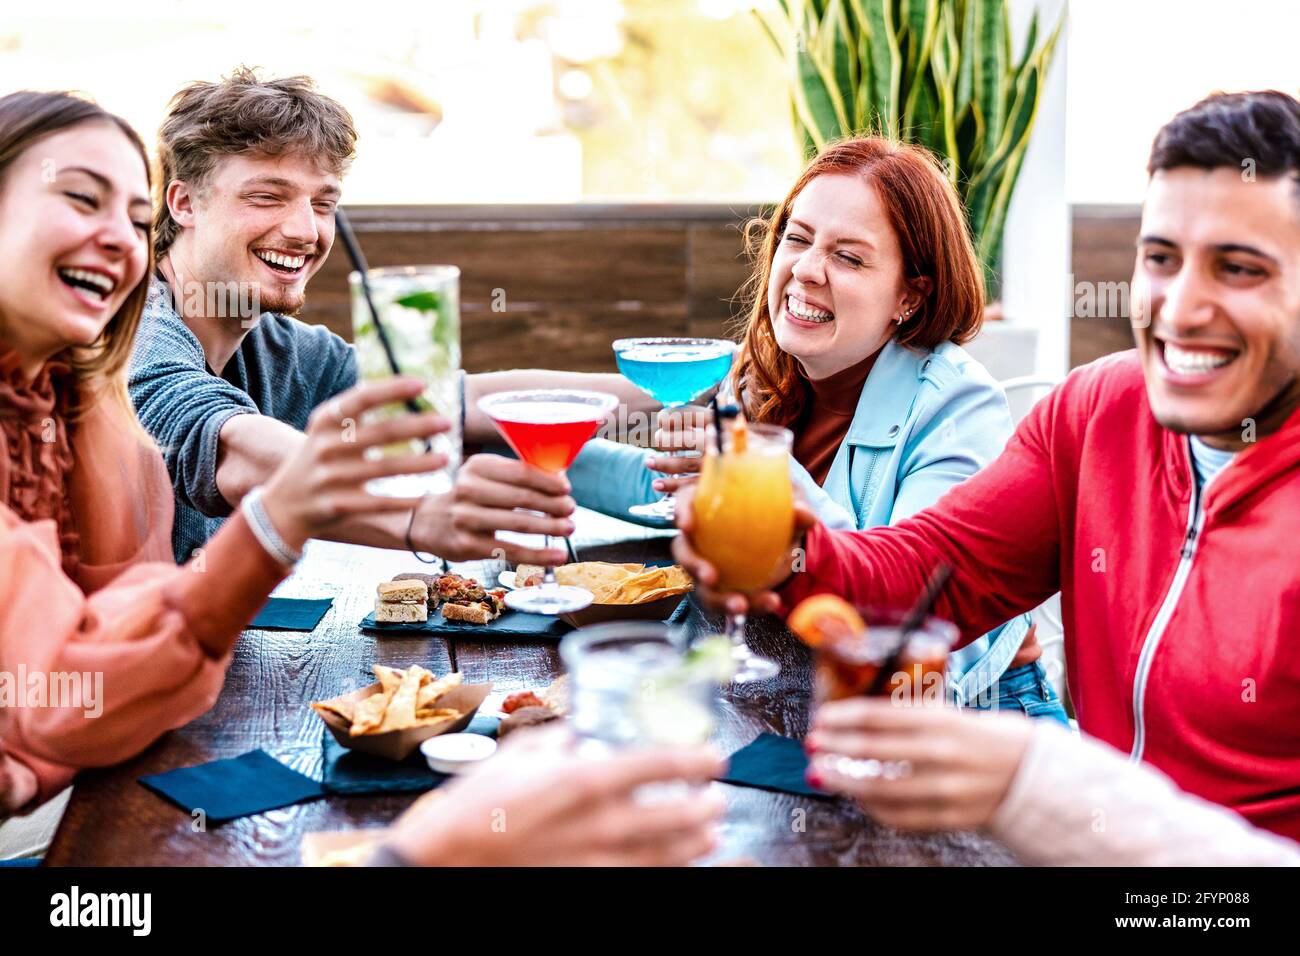 Friends toasting multicolored drinks at fashion cocktail bar restaurant - Life style concept with young people having fun together on happy hour Stock Photo